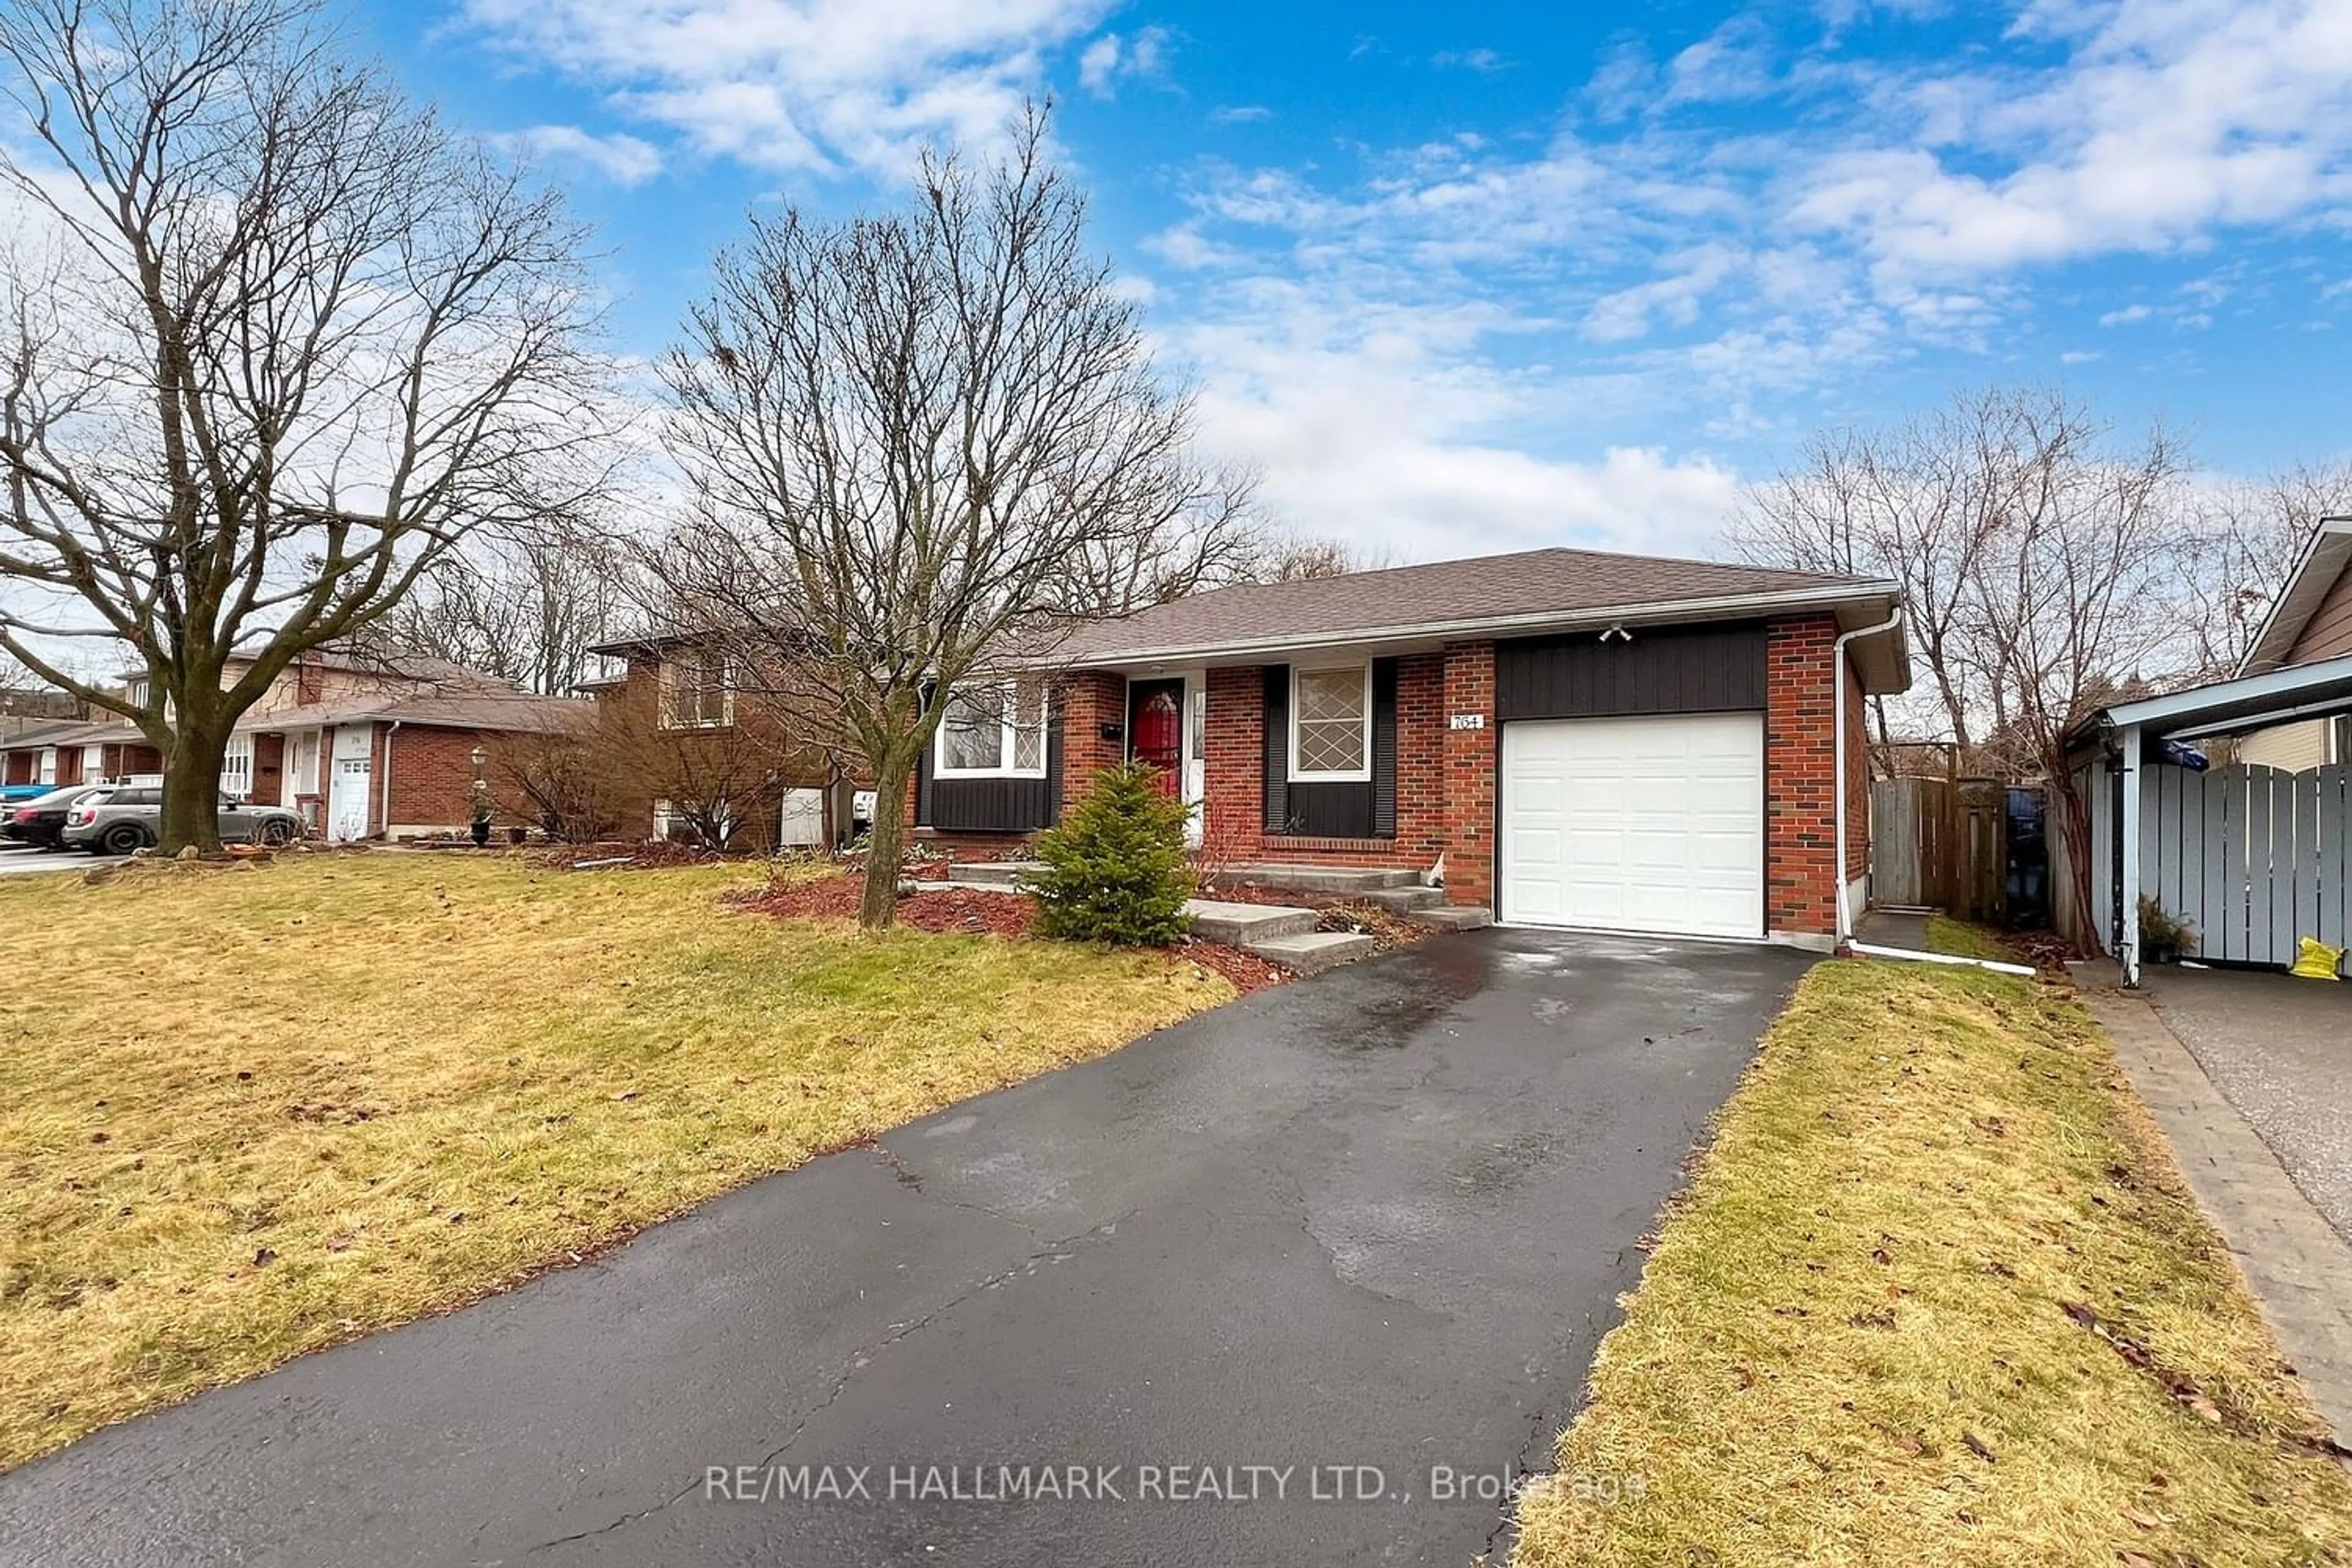 Frontside or backside of a home for 764 Hillcrest Rd, Pickering Ontario L1W 2P4